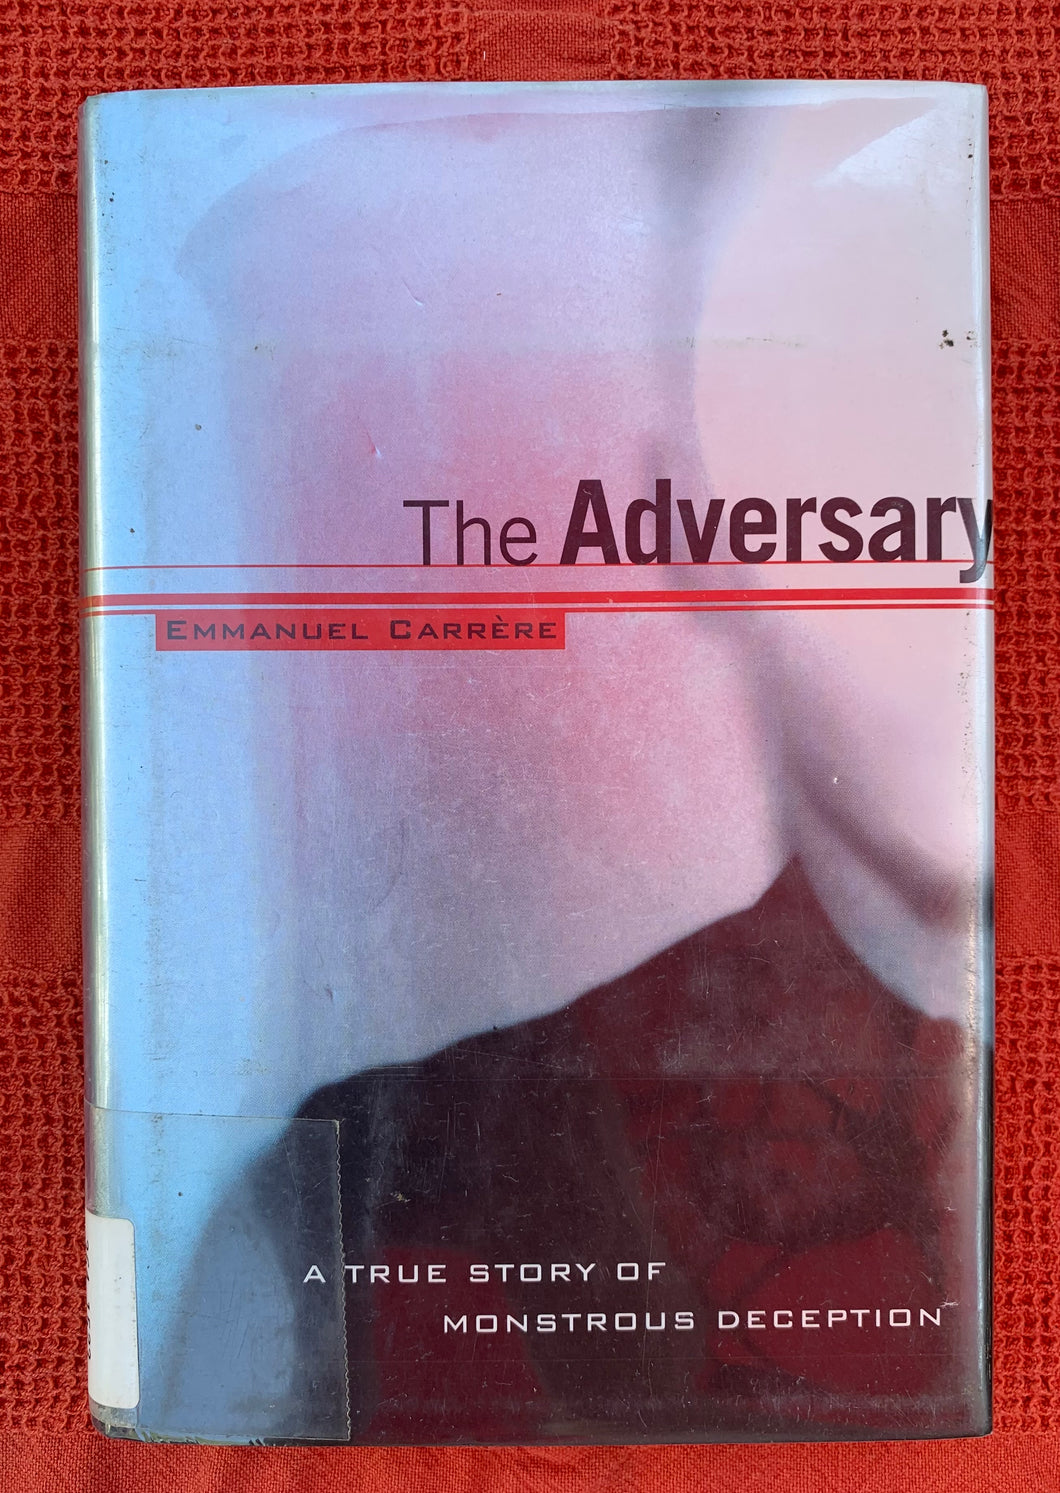 The Adversary: a True Story of Monstrous Deception